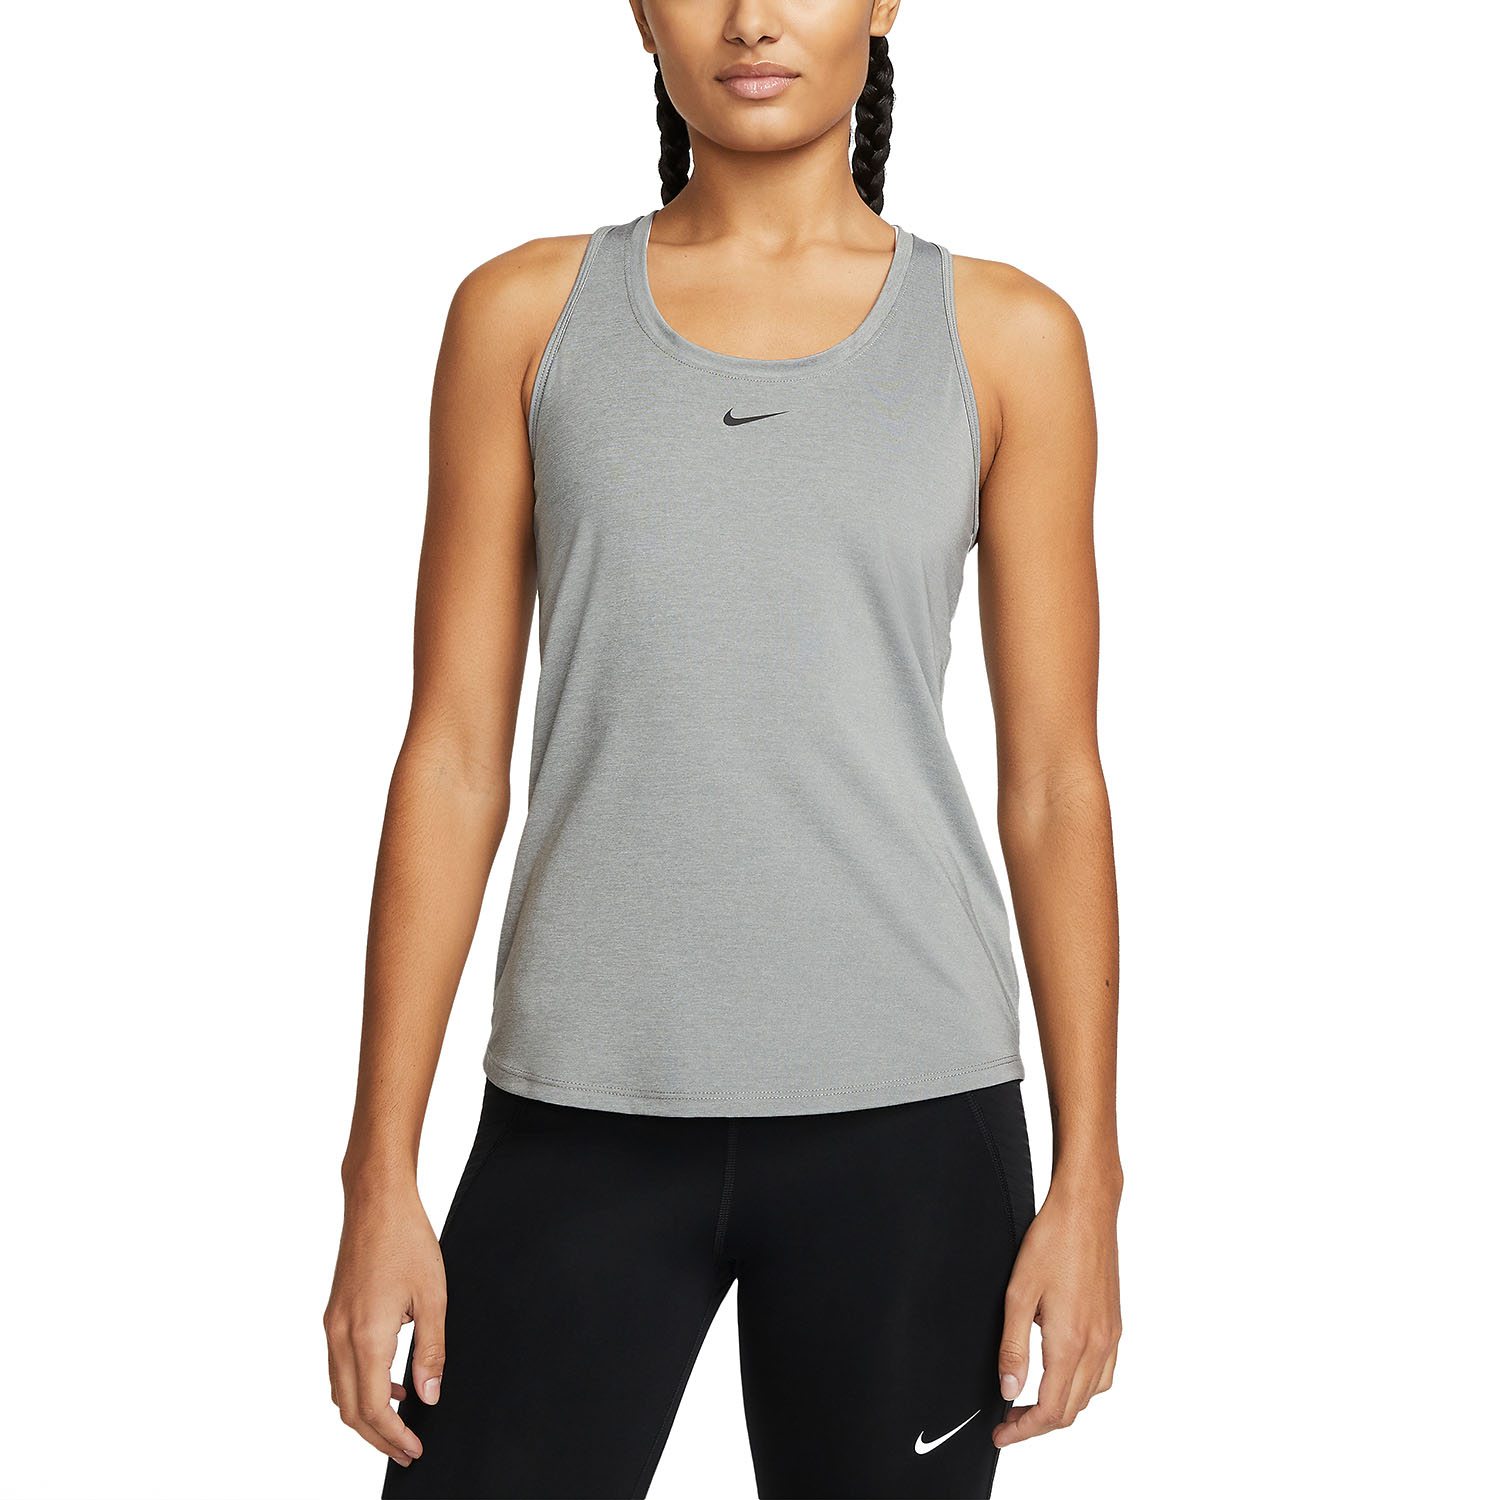 Nike Dri-FIT One Women's Training Tank - Particle Grey/Heather